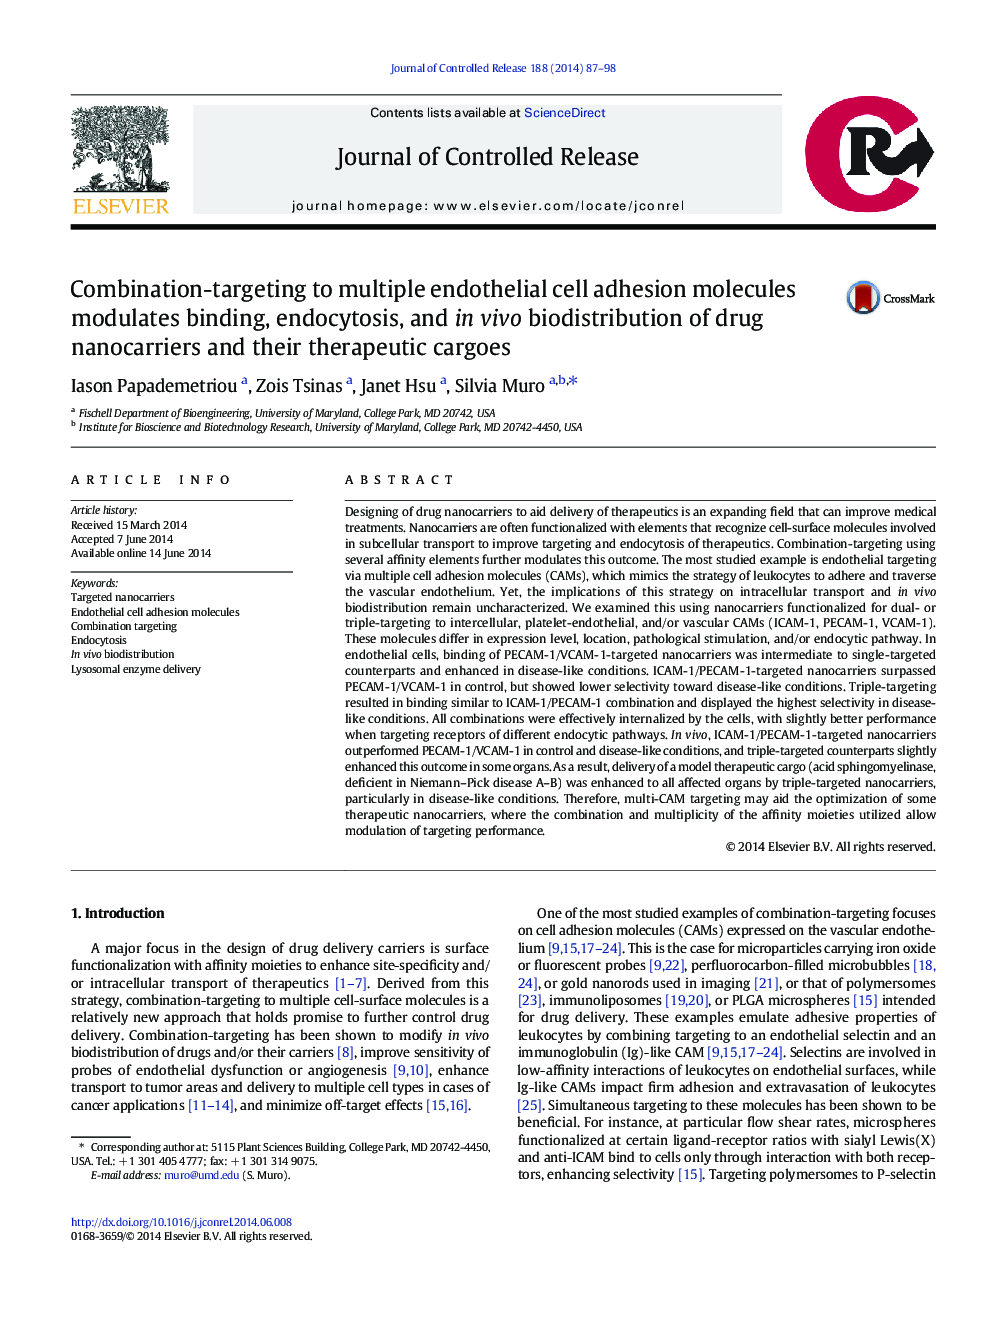 Combination-targeting to multiple endothelial cell adhesion molecules modulates binding, endocytosis, and in vivo biodistribution of drug nanocarriers and their therapeutic cargoes